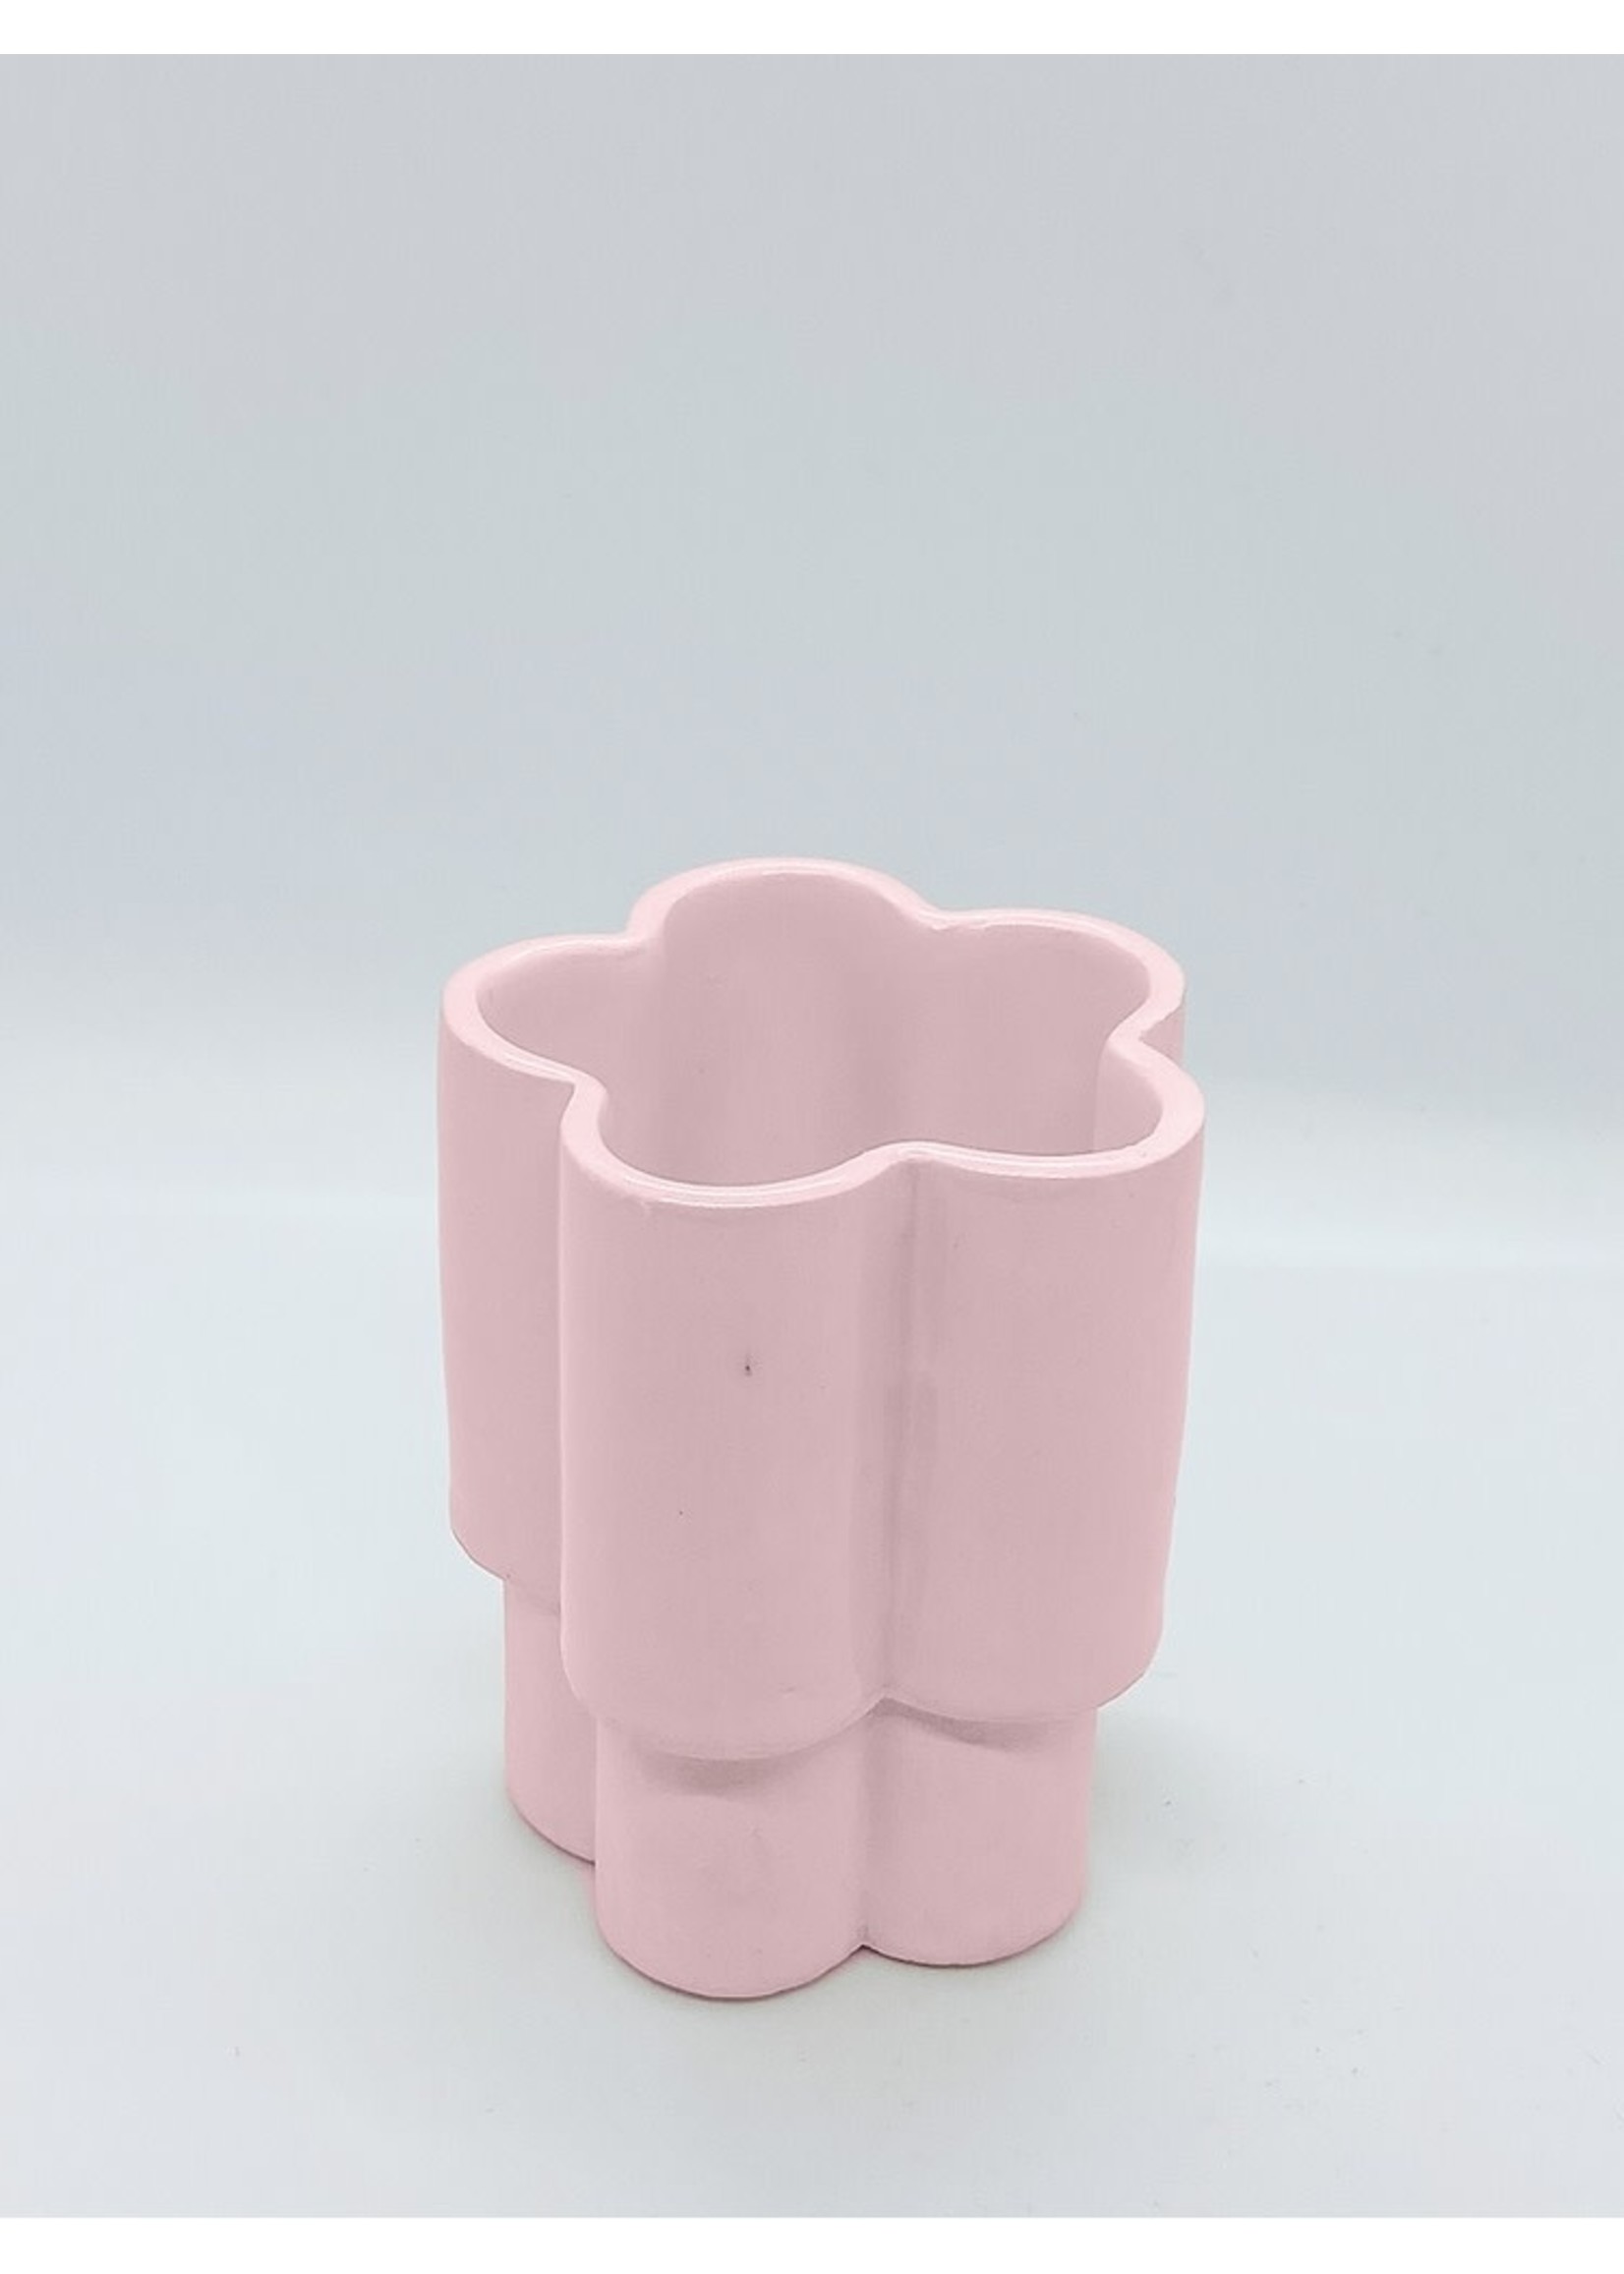 High Noon Ceramic Cup "Fleur" by High Noon